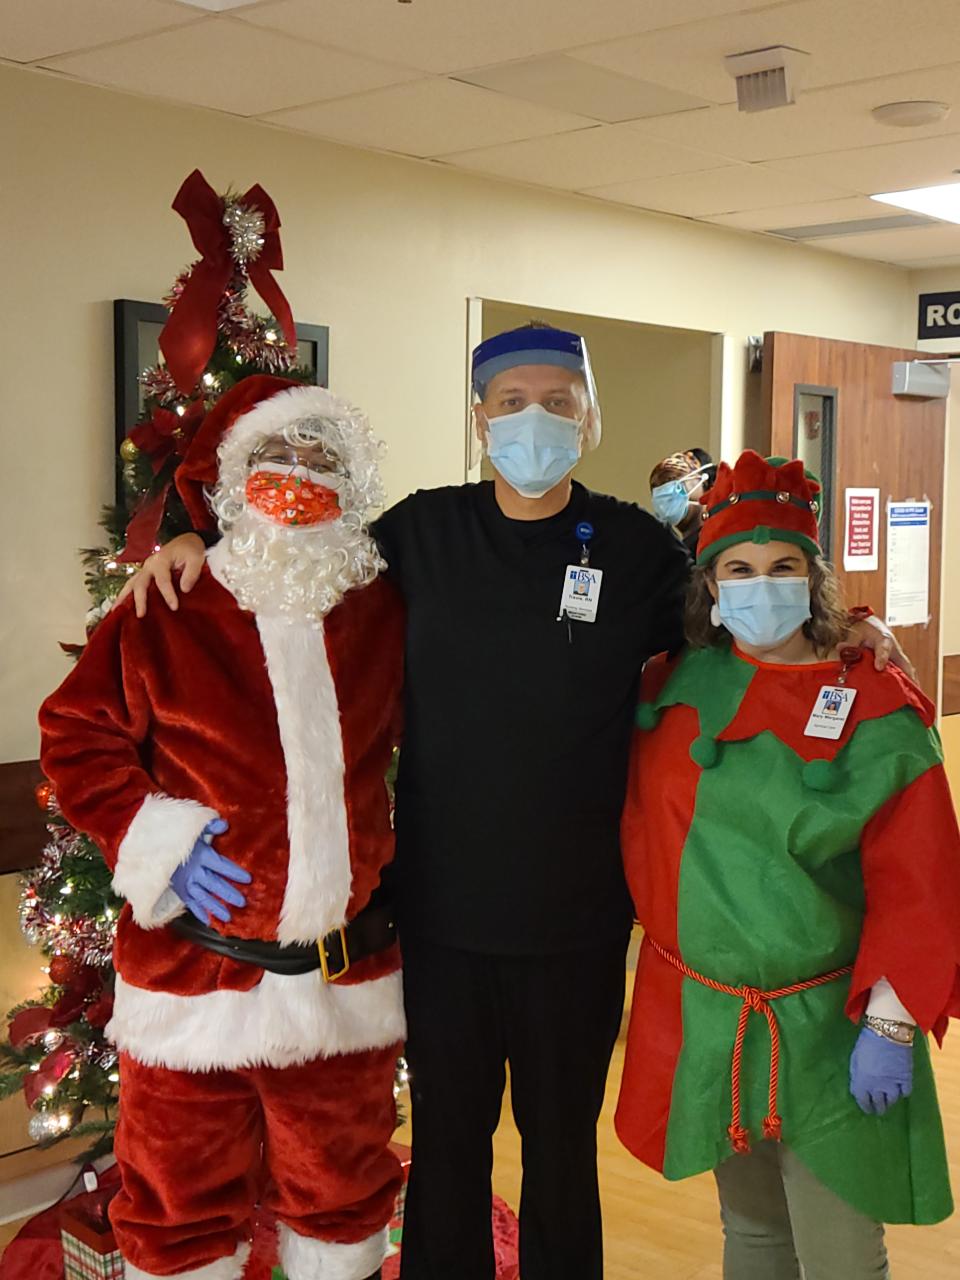 Travis Exum visits with Santa and an elf at an Amarillo, Texas, hospital where he went to serve as a registered nurse on a COVID-19 front-line disaster relief team. Despite precautions, Exum contracted the virus and is now dealing with long COVID. Dec. 16, 2020